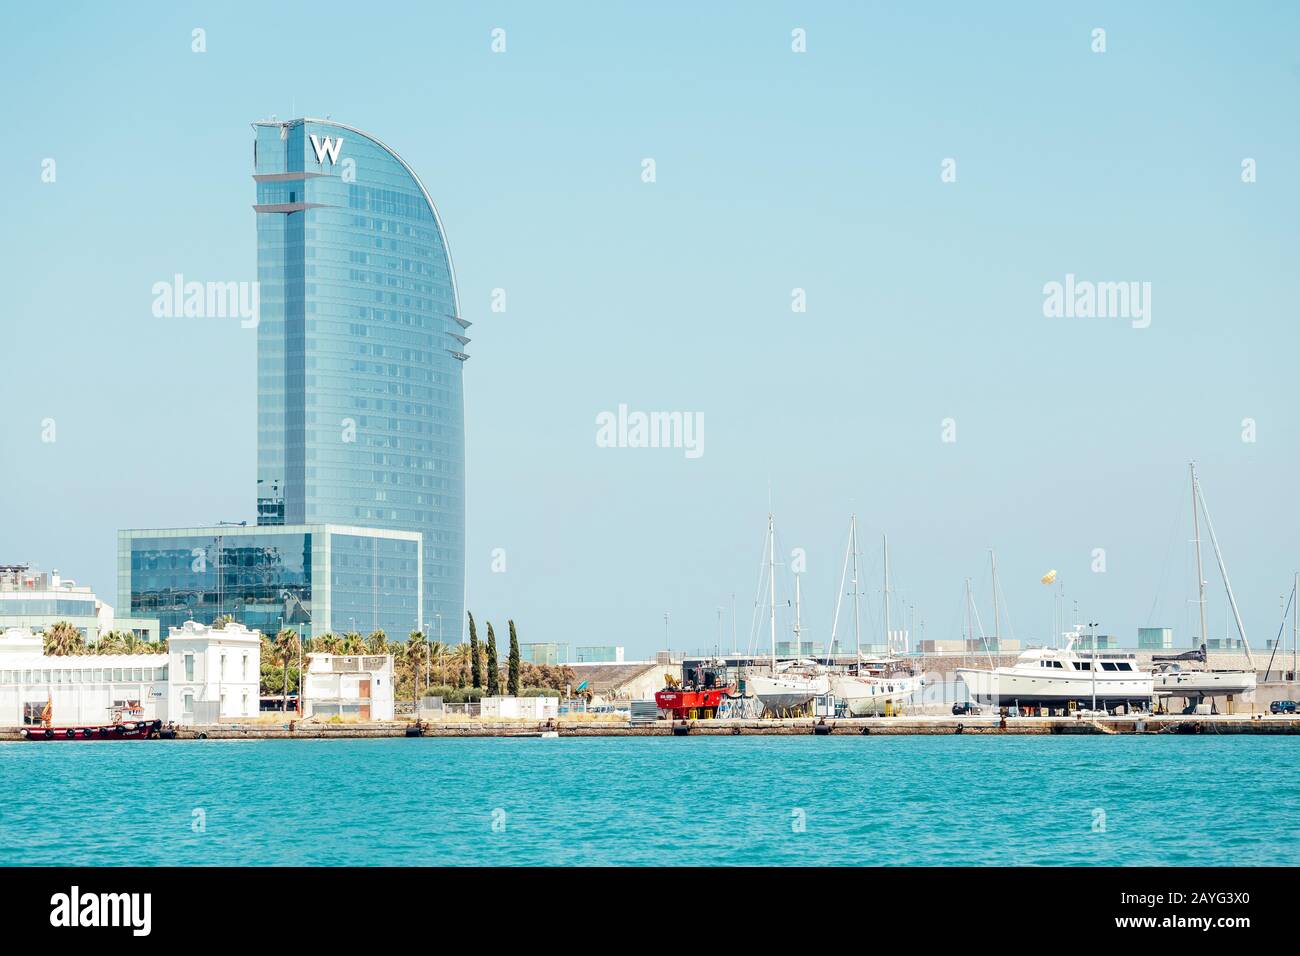 29 JULY 2018, BARCELONA, SPAIN: Famous sail shaped Hotel W skyscrapper Stock Photo